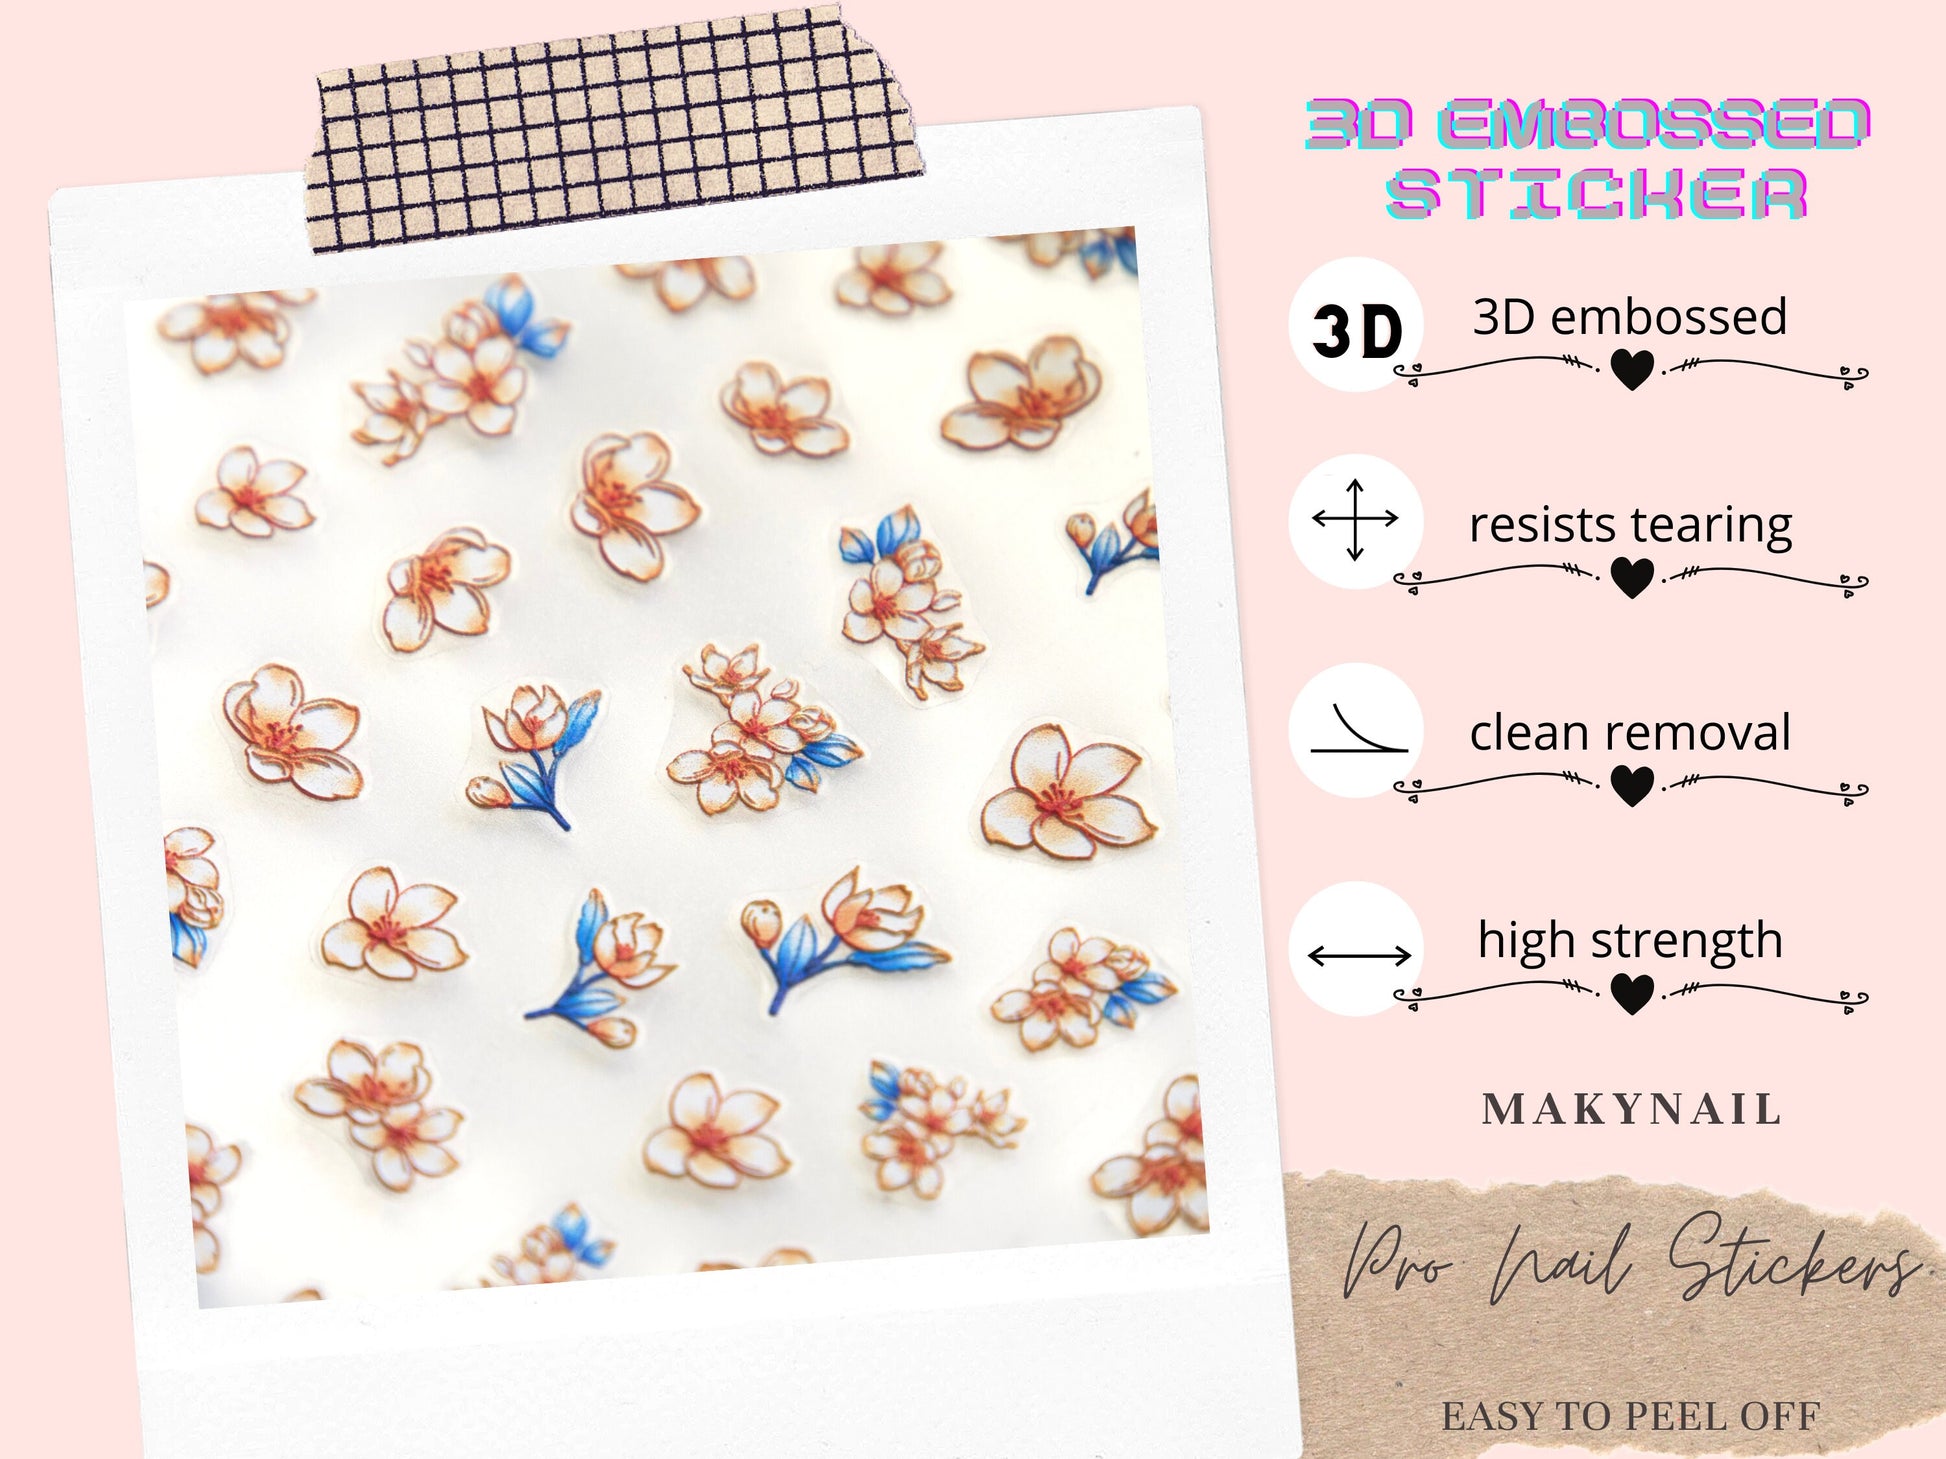 Sakura Floral Nail sticker/ Vintage style Embossed Flower 3D Nail Art Stickers Self Peel off Nail art /Sunflower Nail Art Decals